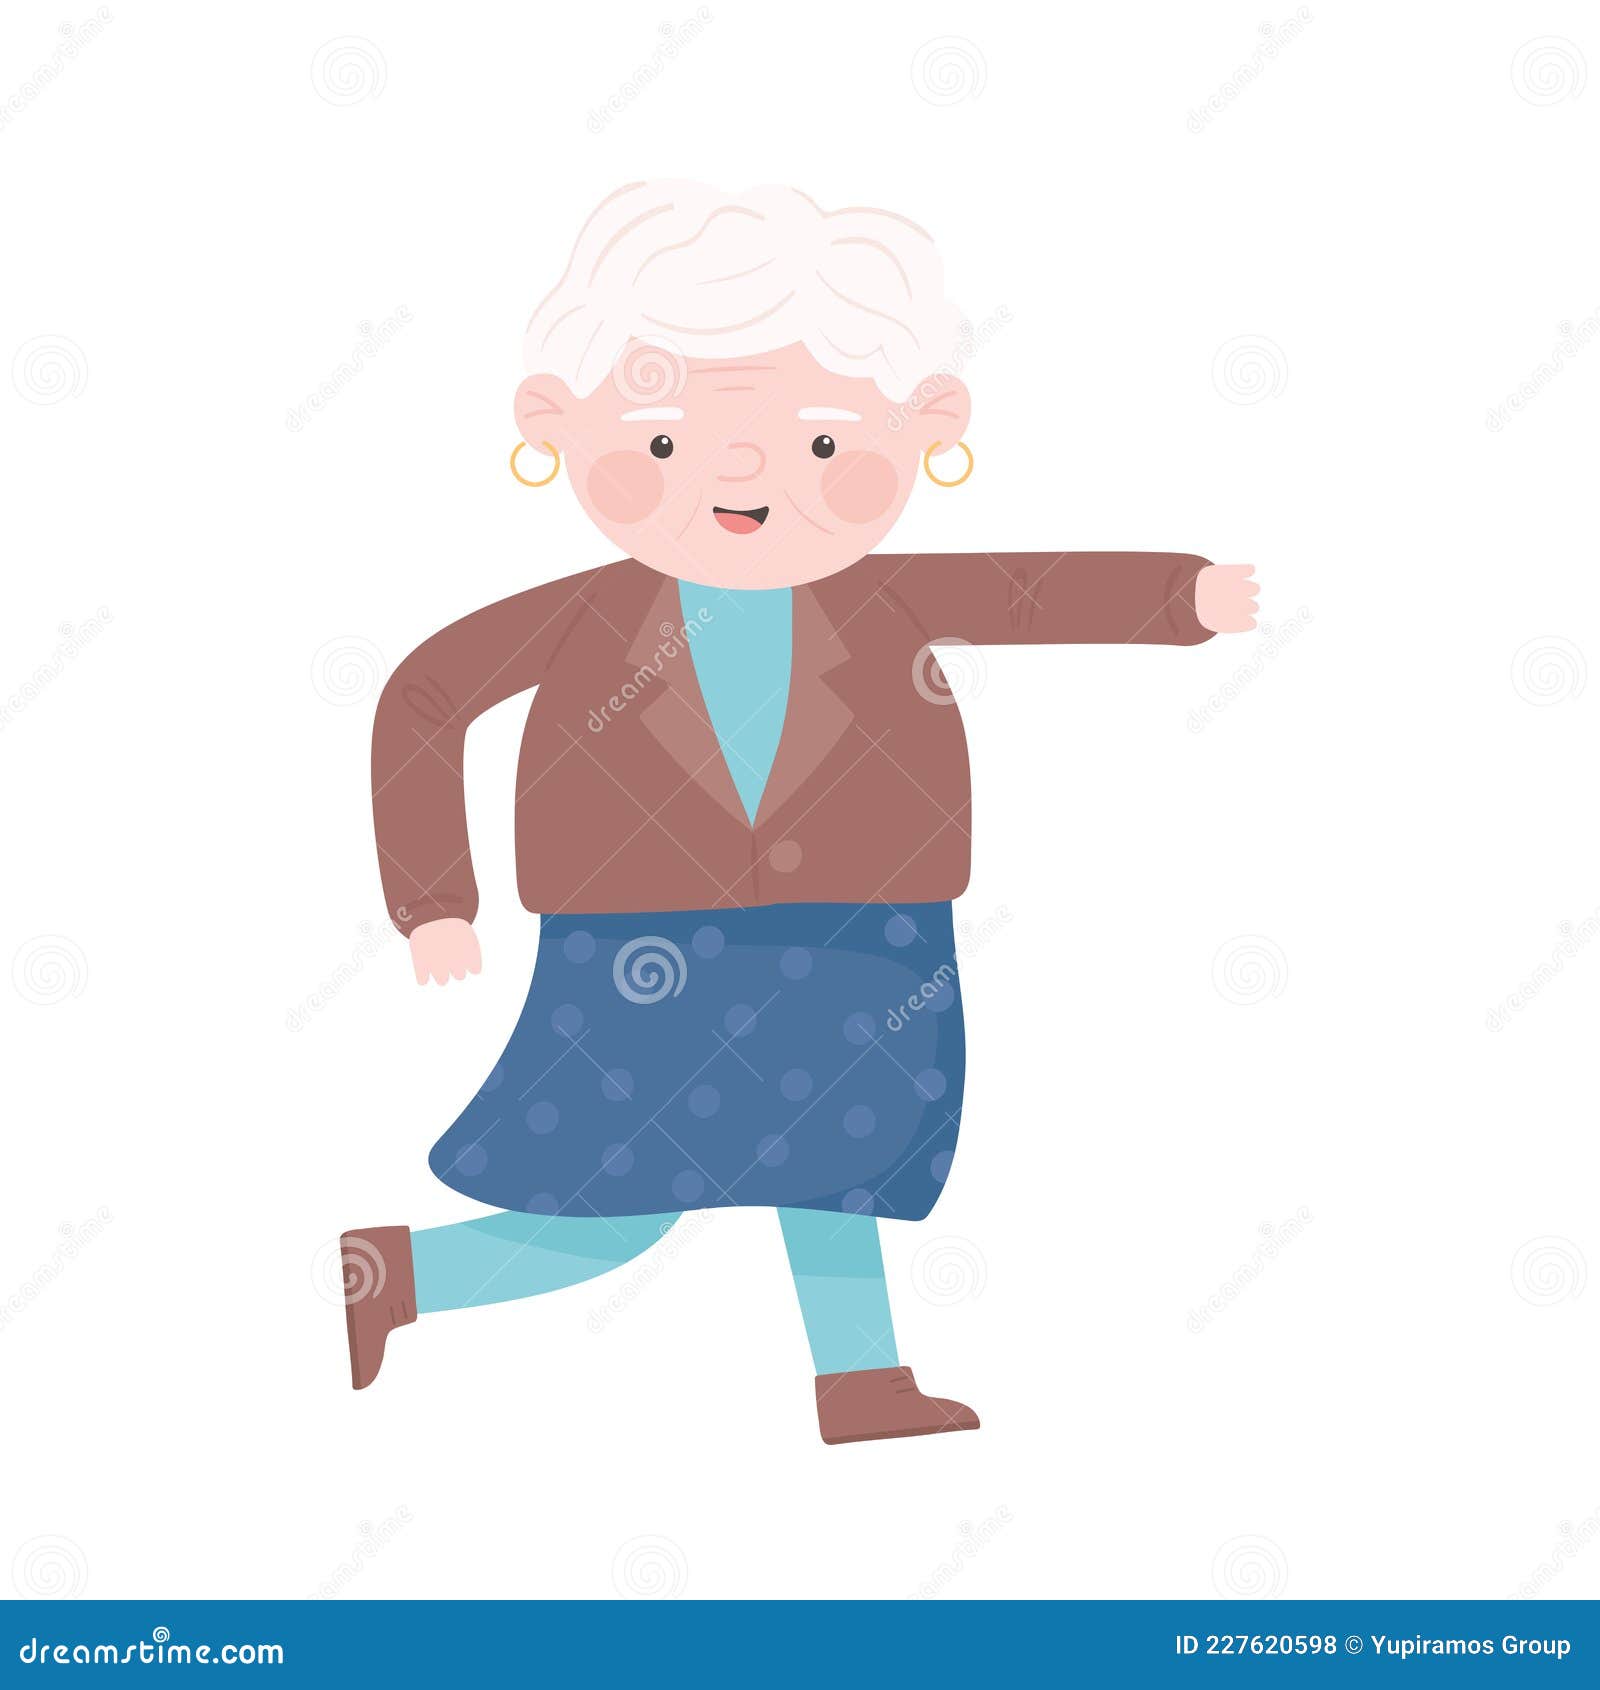 grandmothers clipart projects